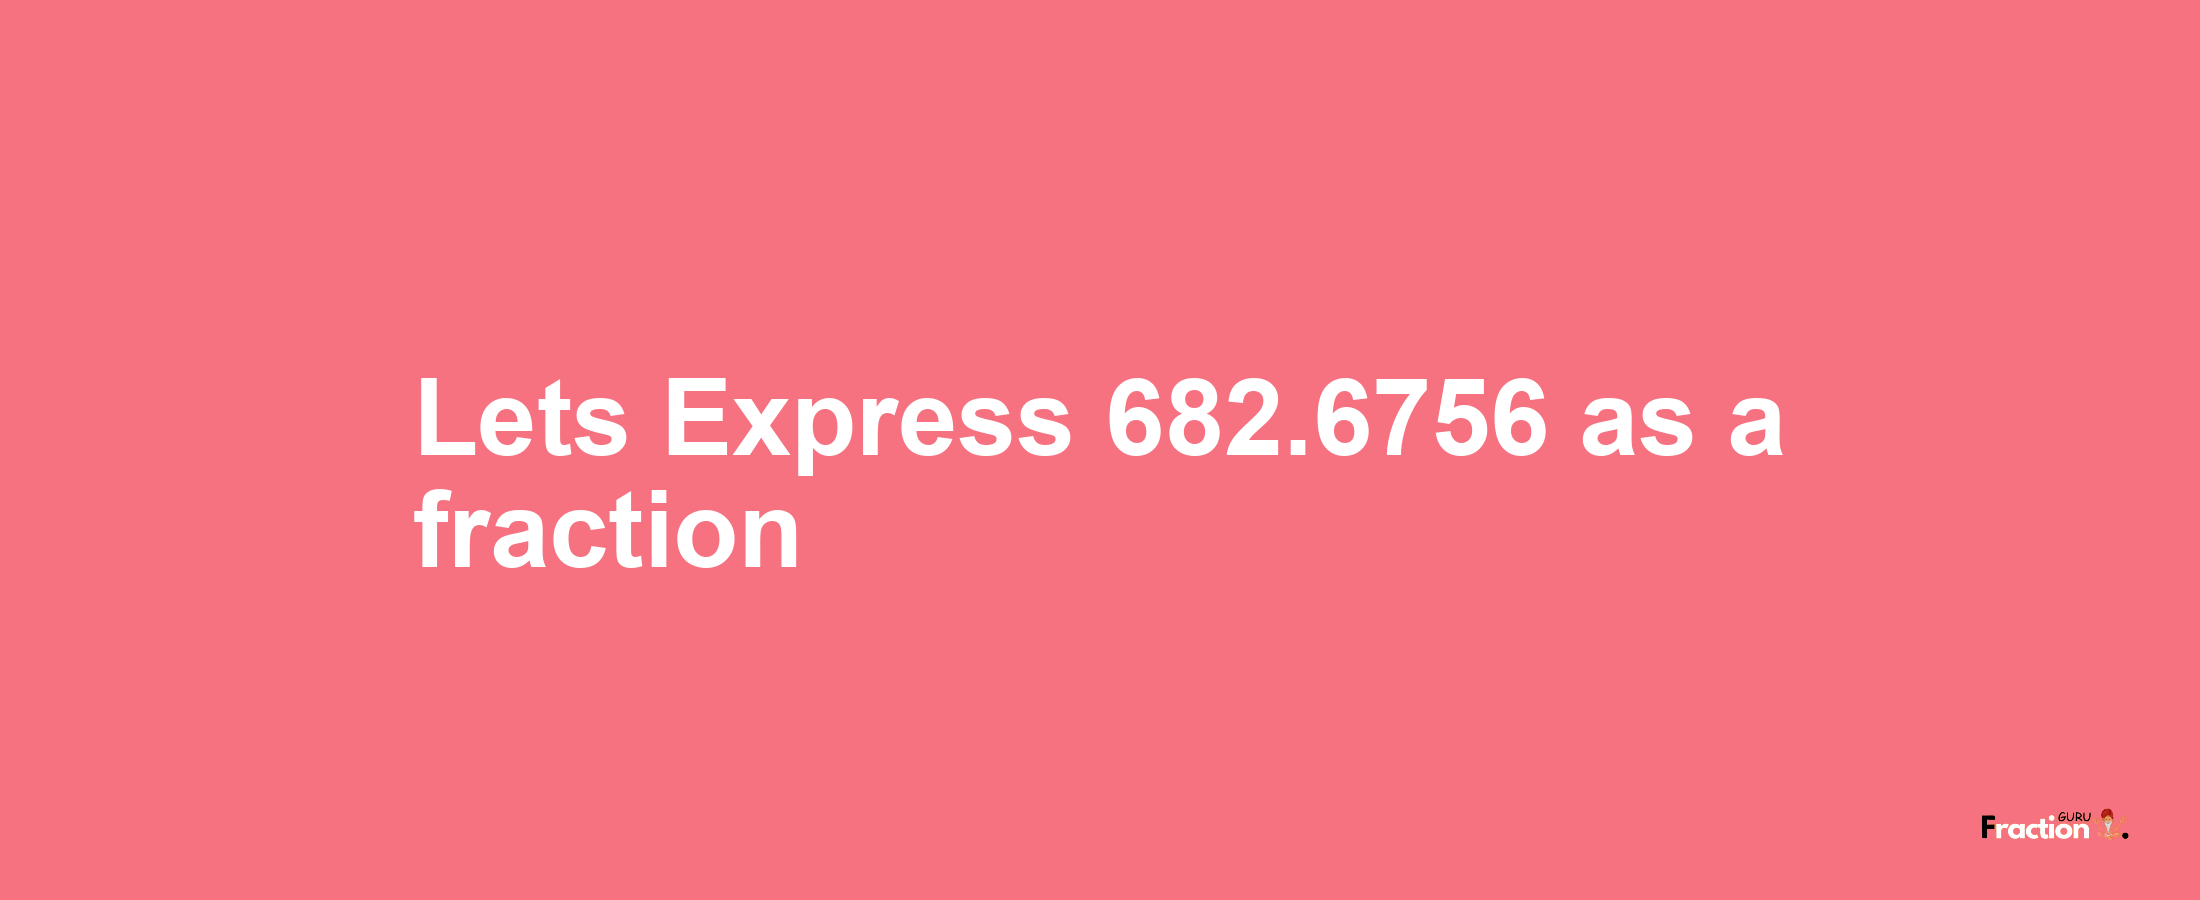 Lets Express 682.6756 as afraction